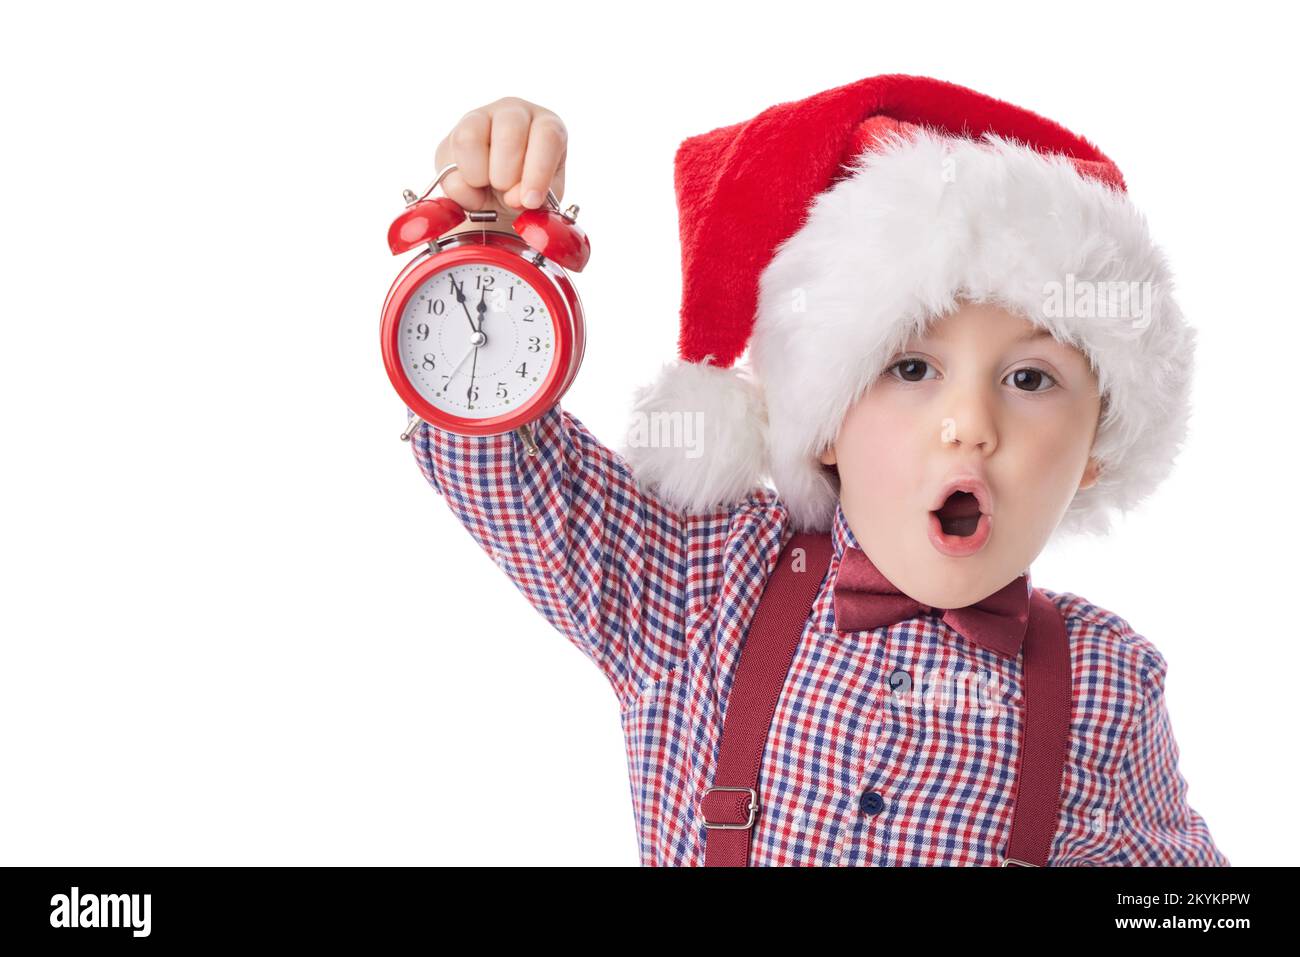 Christmas boy with red alarm clock, smiling little man in red Santa claus hat, tie and suspender posing on white background Stock Photo